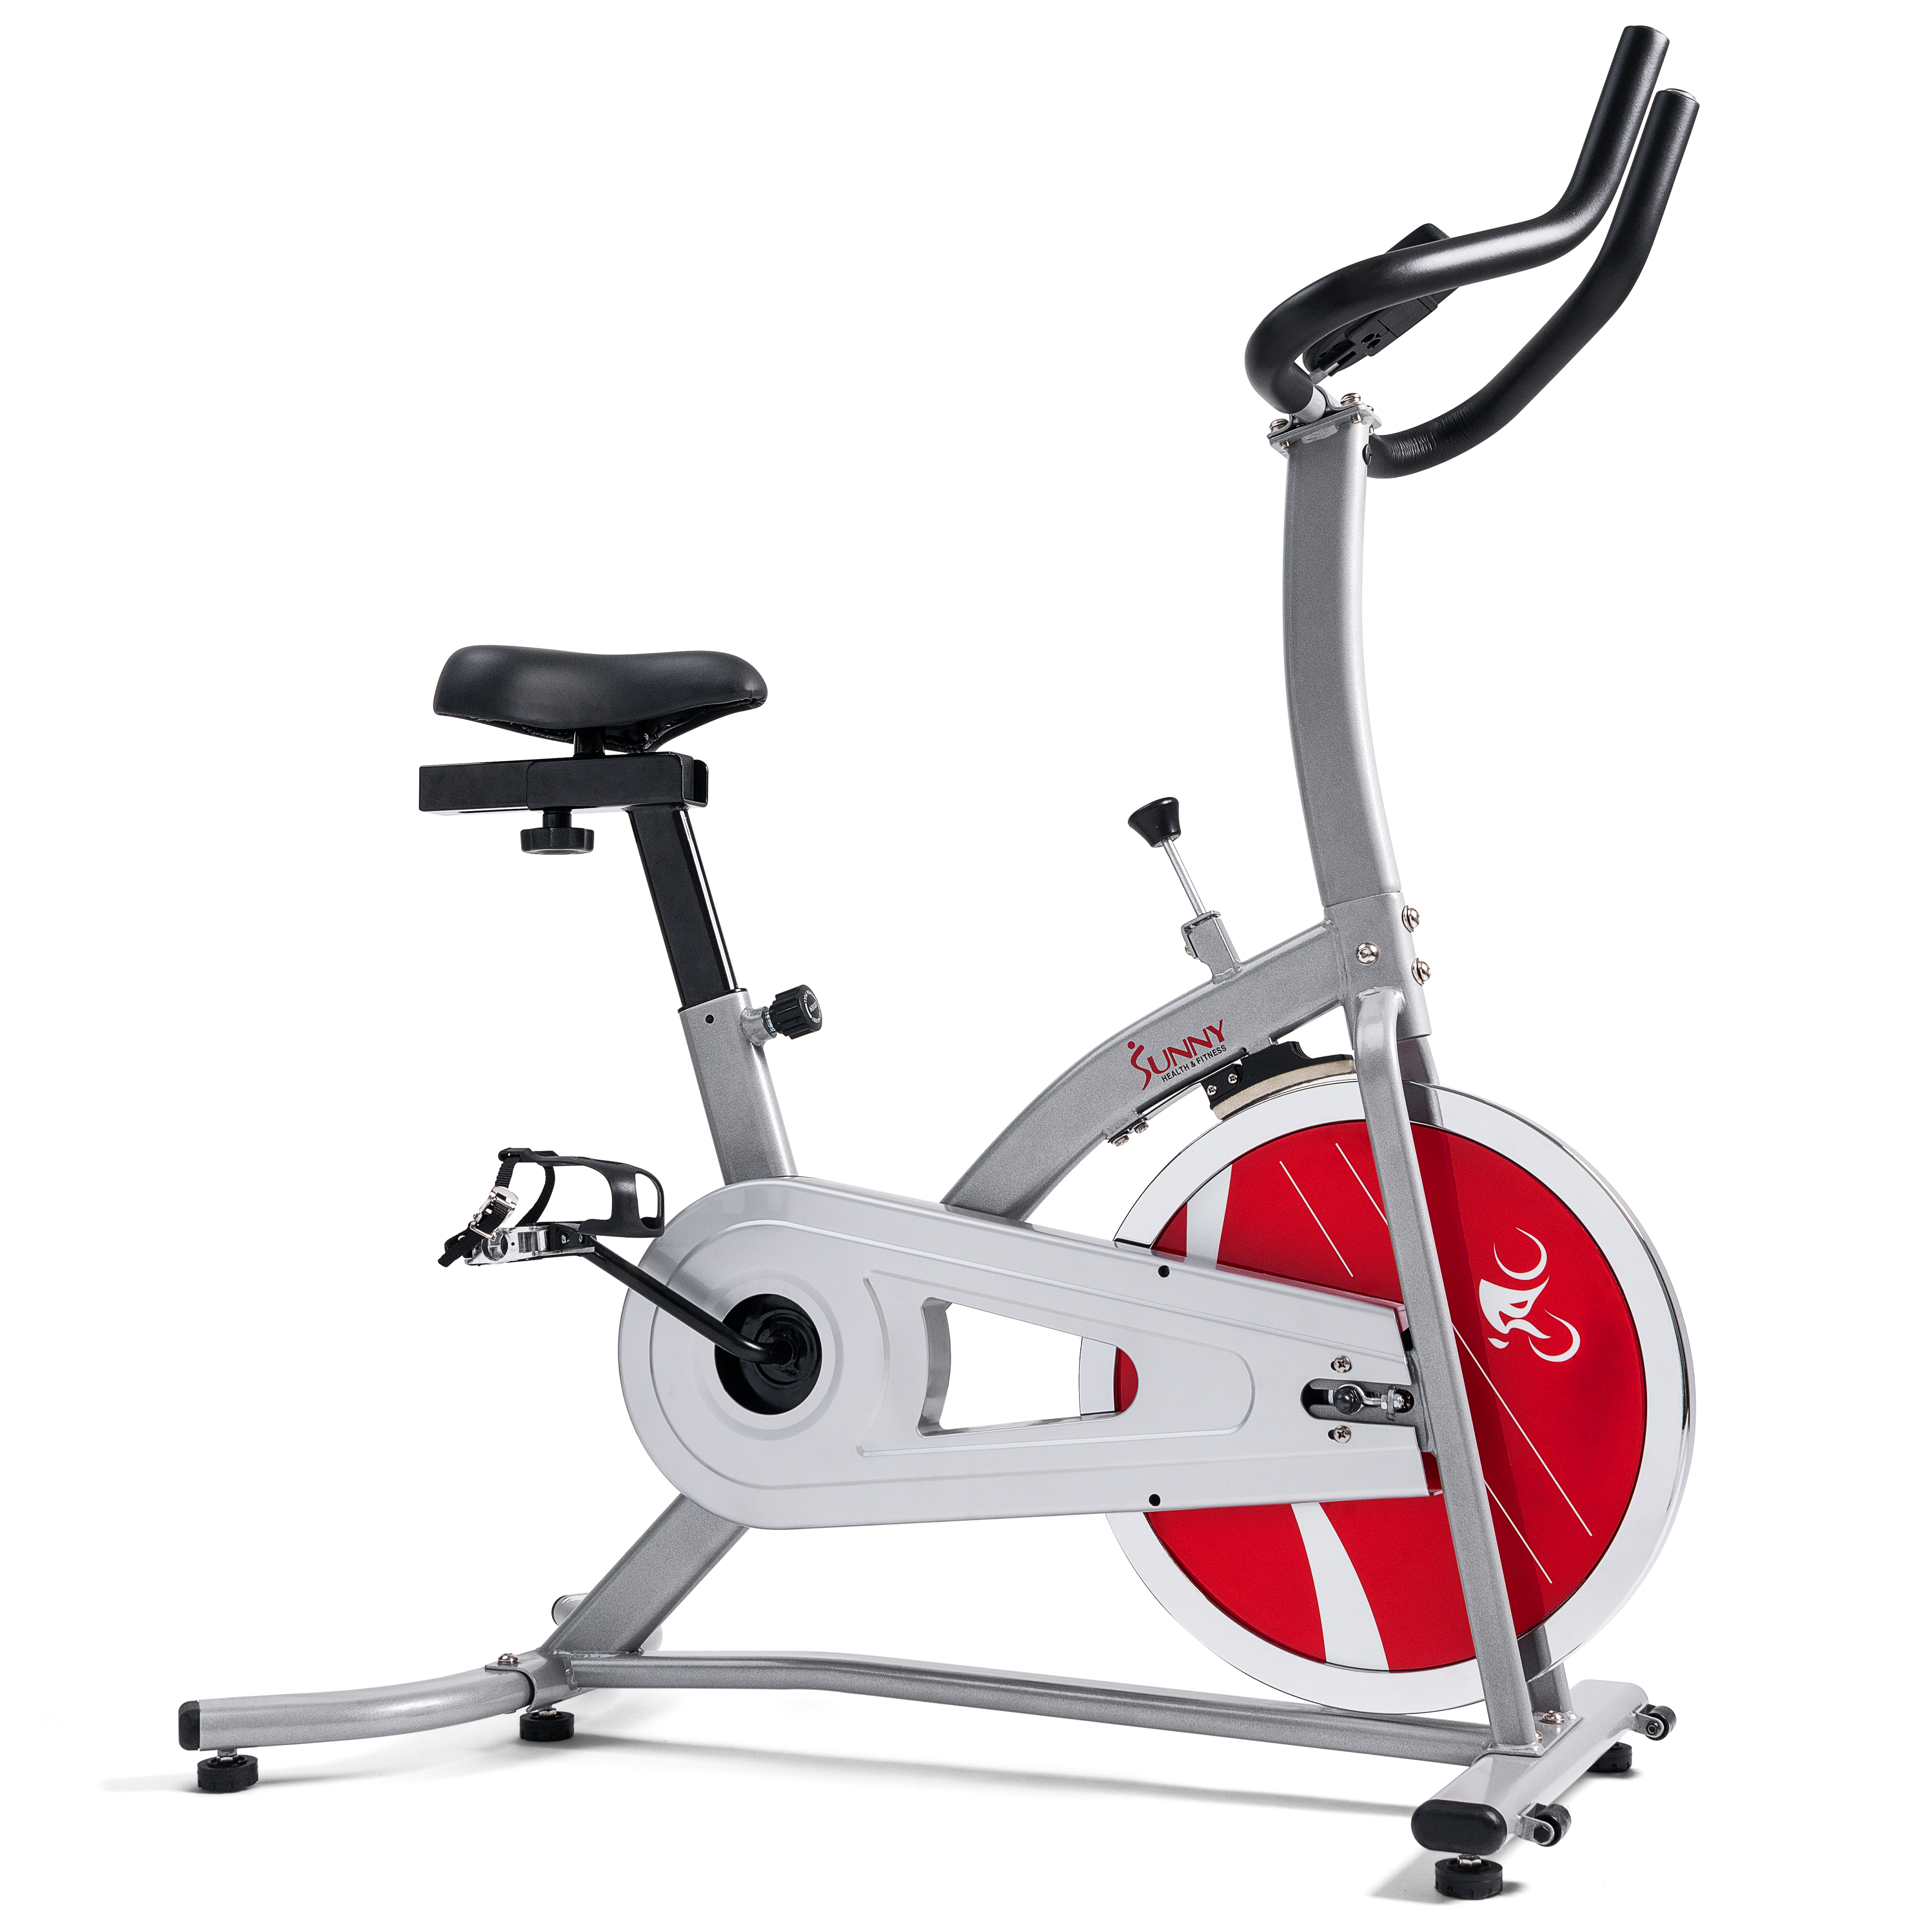 Sunny Health & Fitness Indoor Cycling Exercise Stationary Bike with Monitor and Flywheel Bike for Home Workout Trainer, SF-B1203 - image 1 of 6